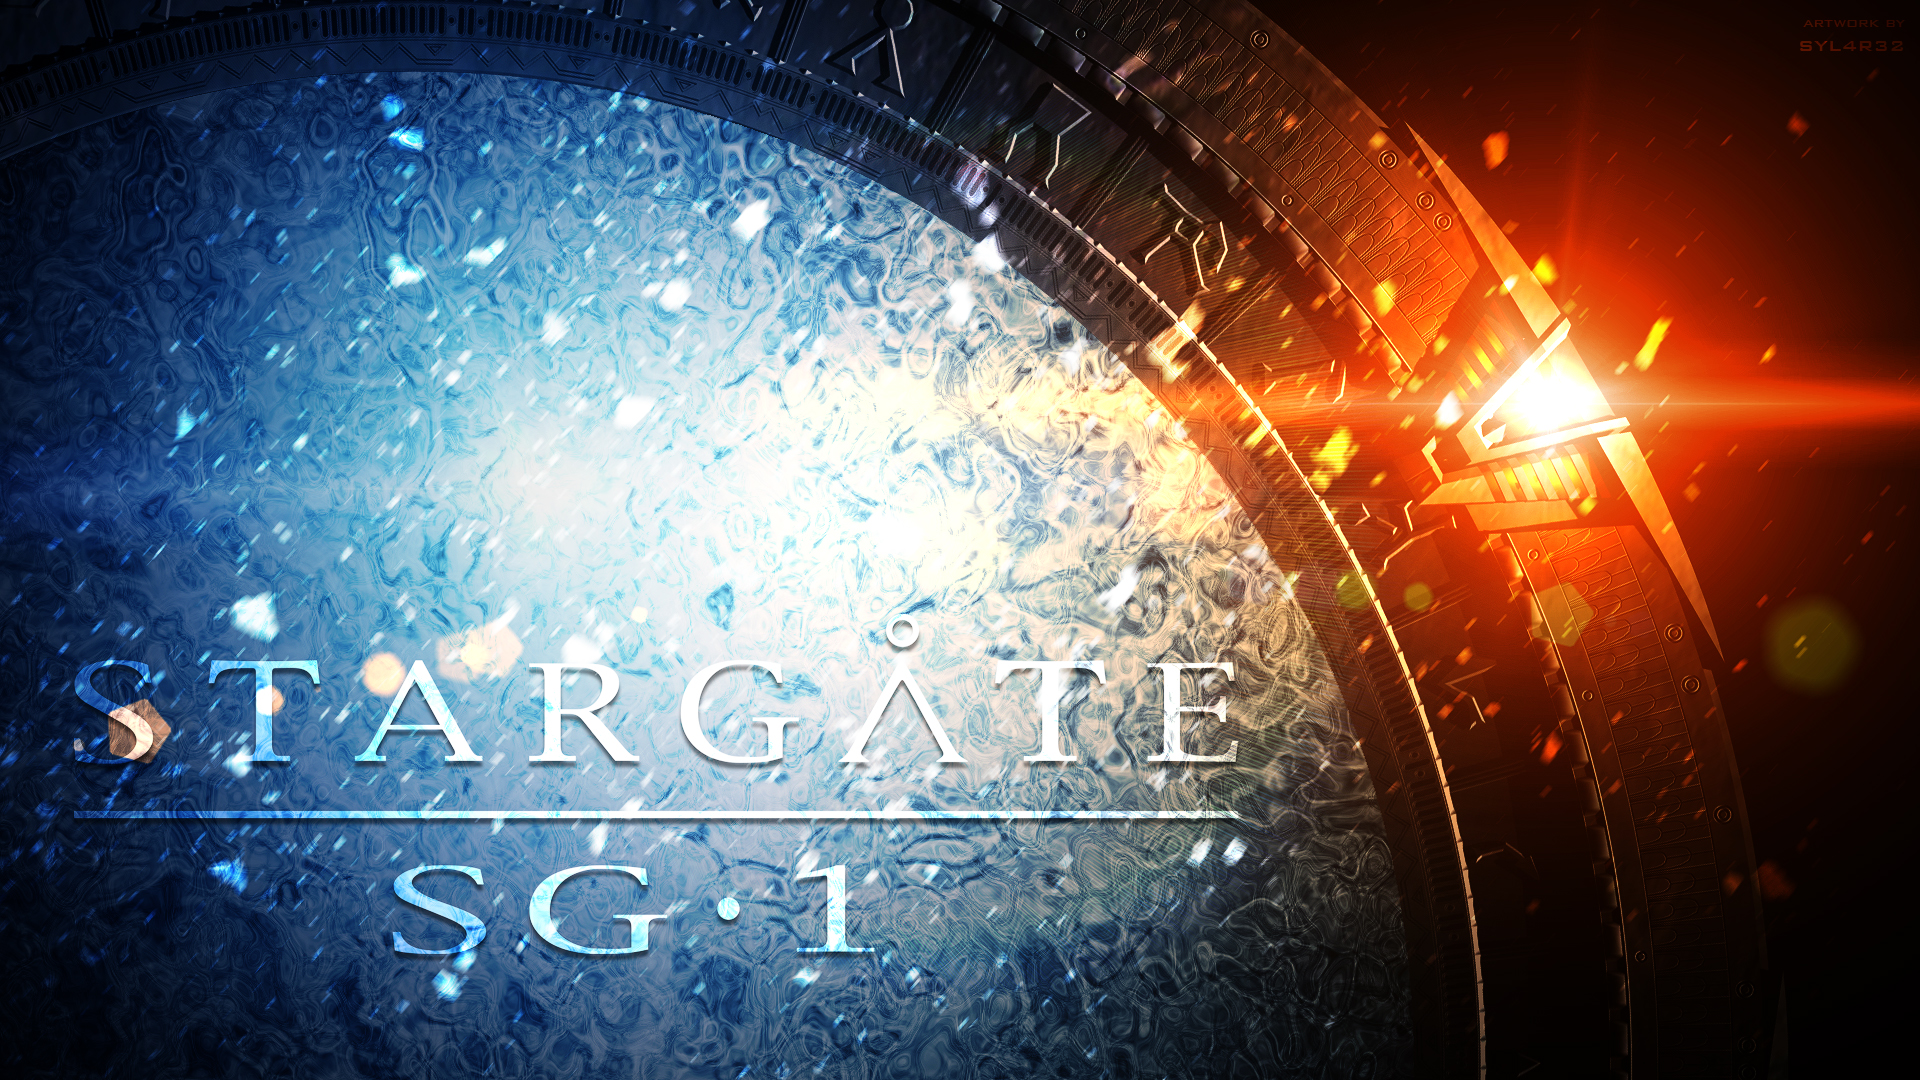 Download Stargate wallpapers for mobile phone free Stargate HD pictures